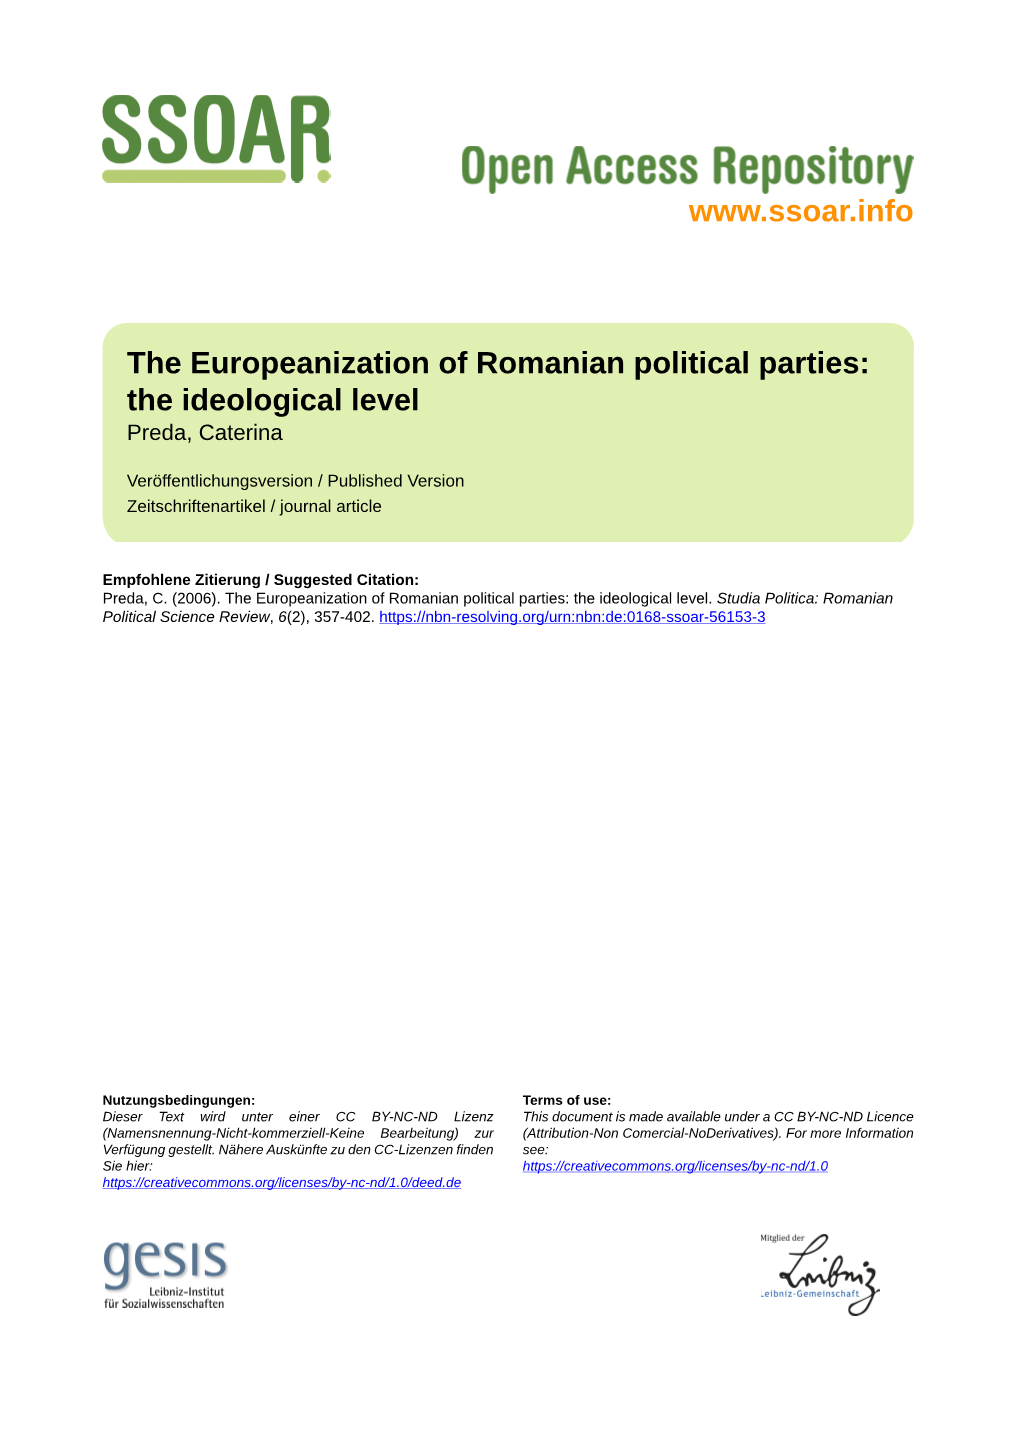 The Europeanization of Romanian Political Parties: the Ideological Level